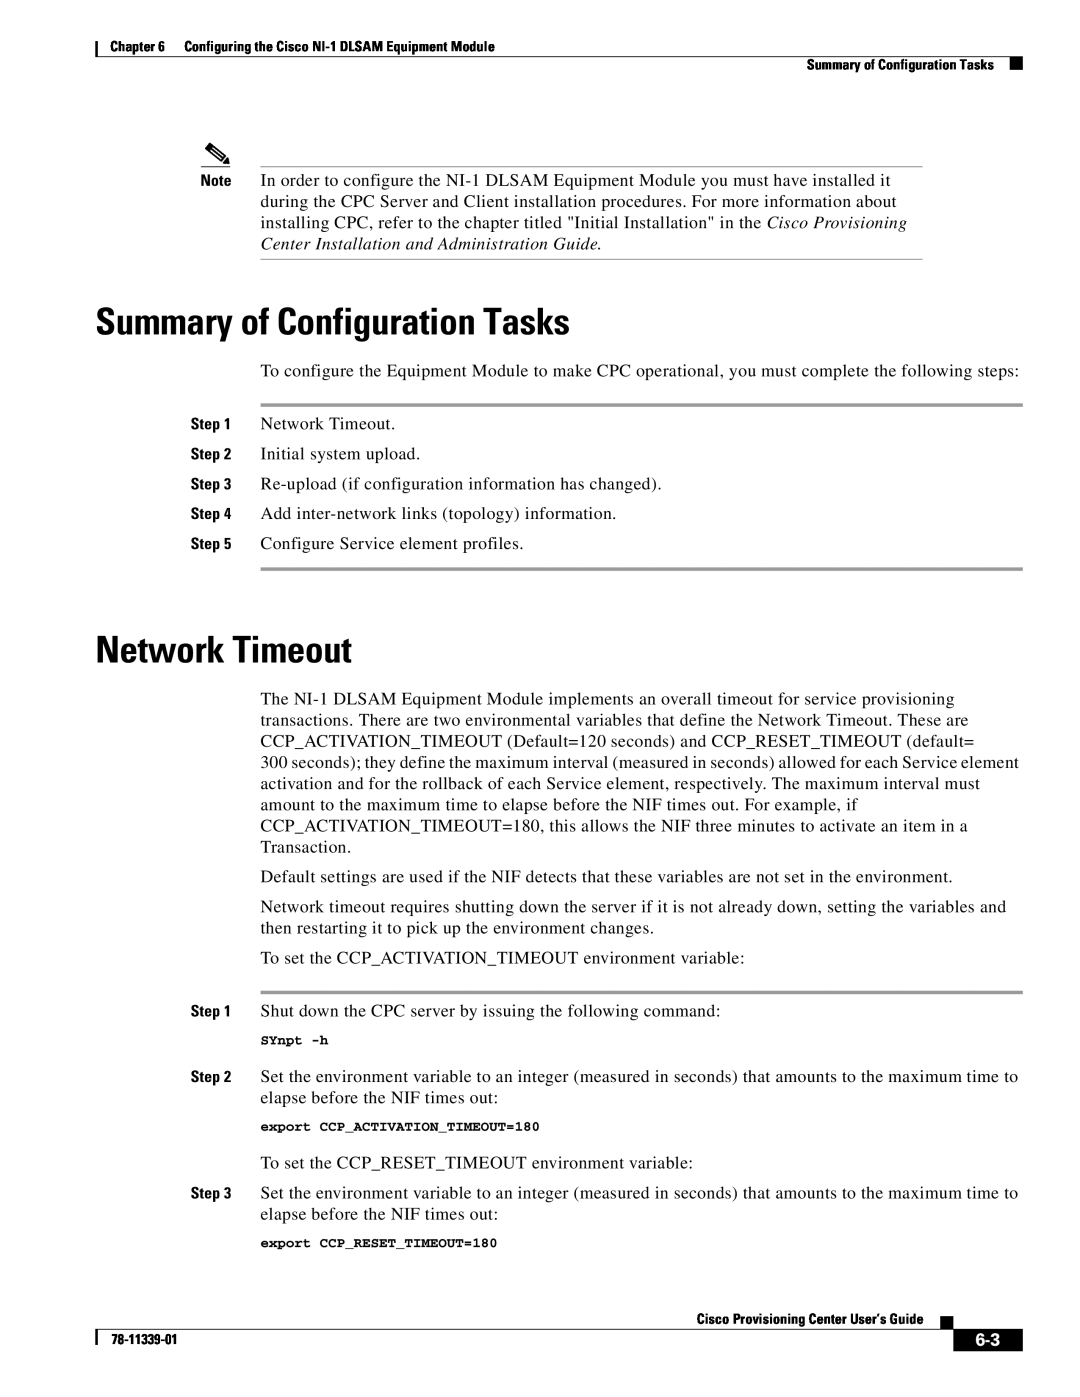 Cisco Systems NI-1 manual Summary of Configuration Tasks, Network Timeout 